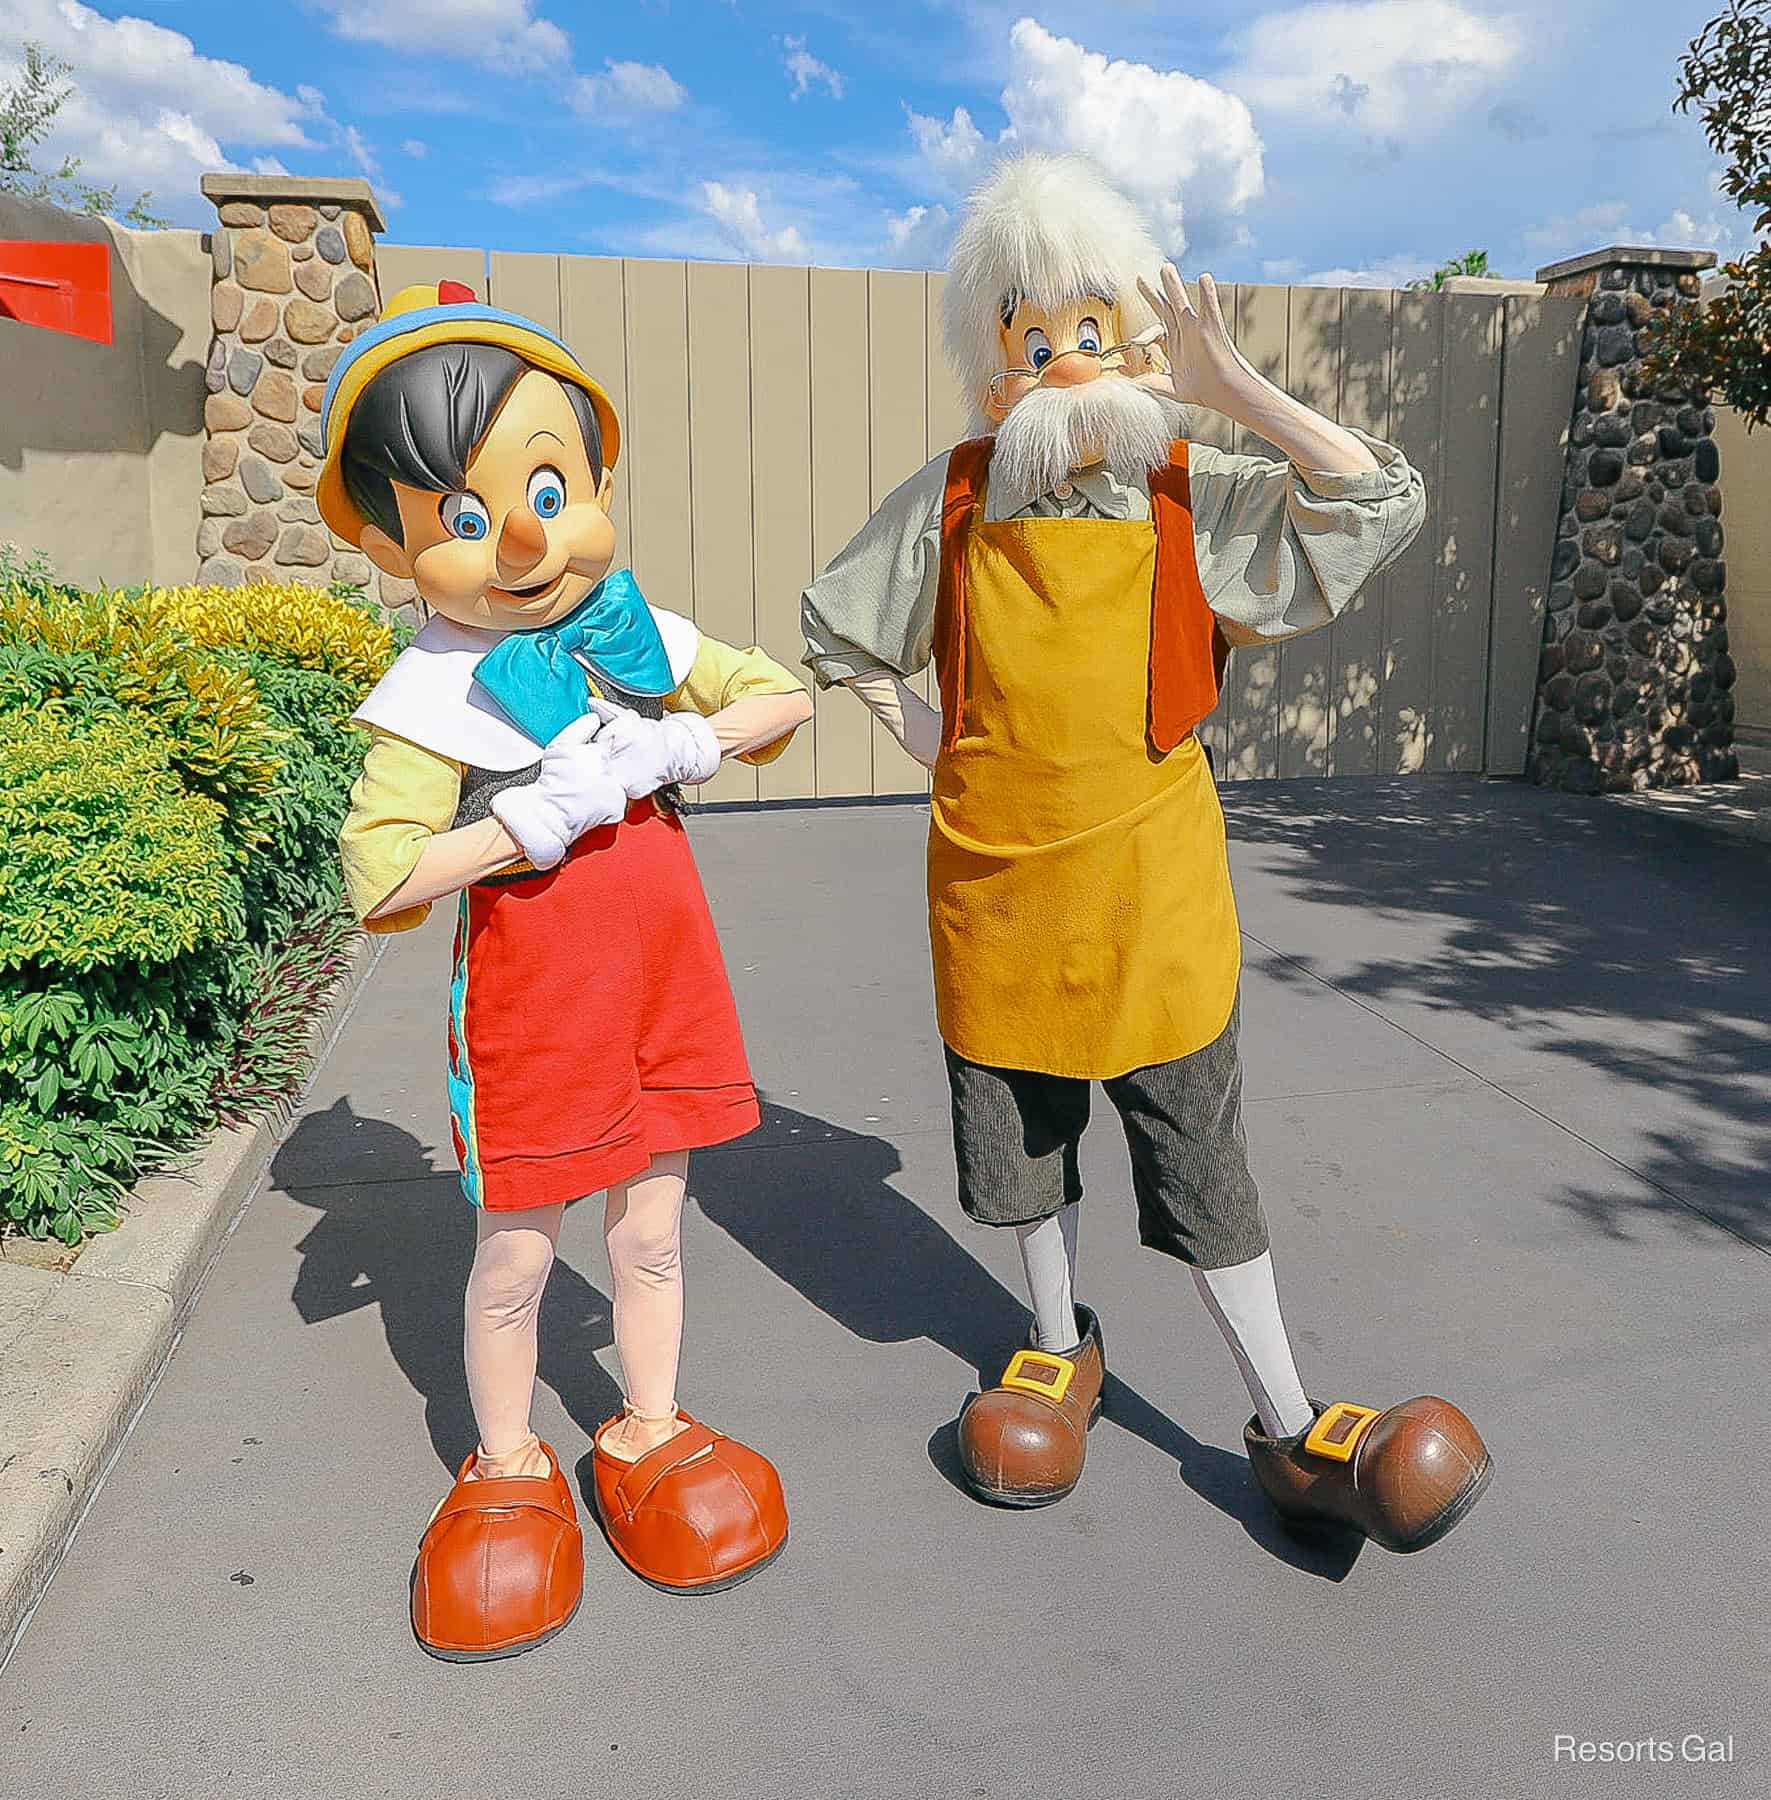 Pinocchio and Gepetto outside a fence near the entrance of Disney's Hollywood Studios 